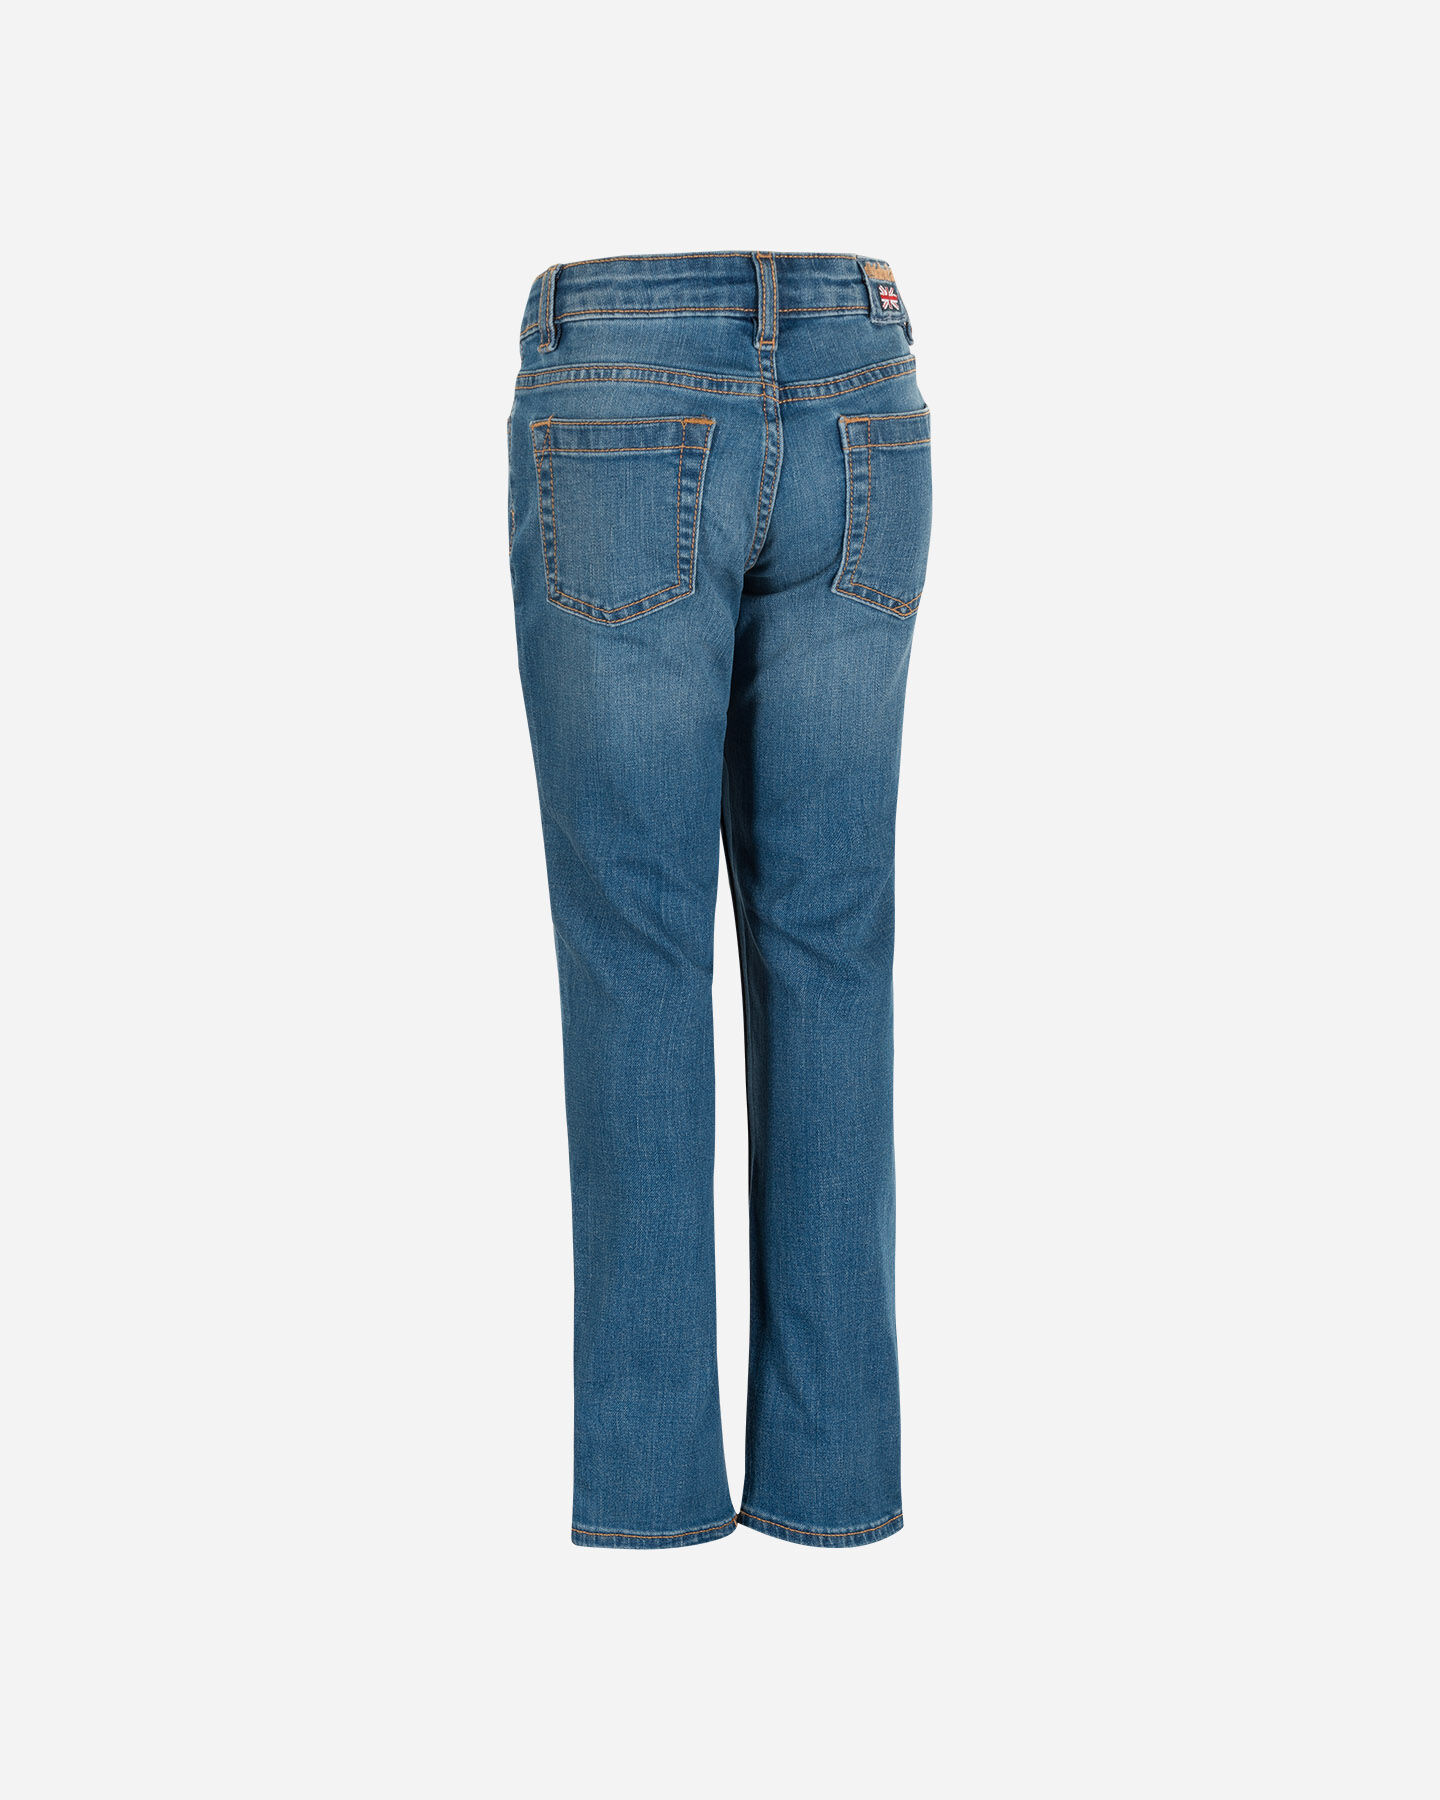  Jeans ADMIRAL LIFESTYLE JR S4101336|MD|6A scatto 1